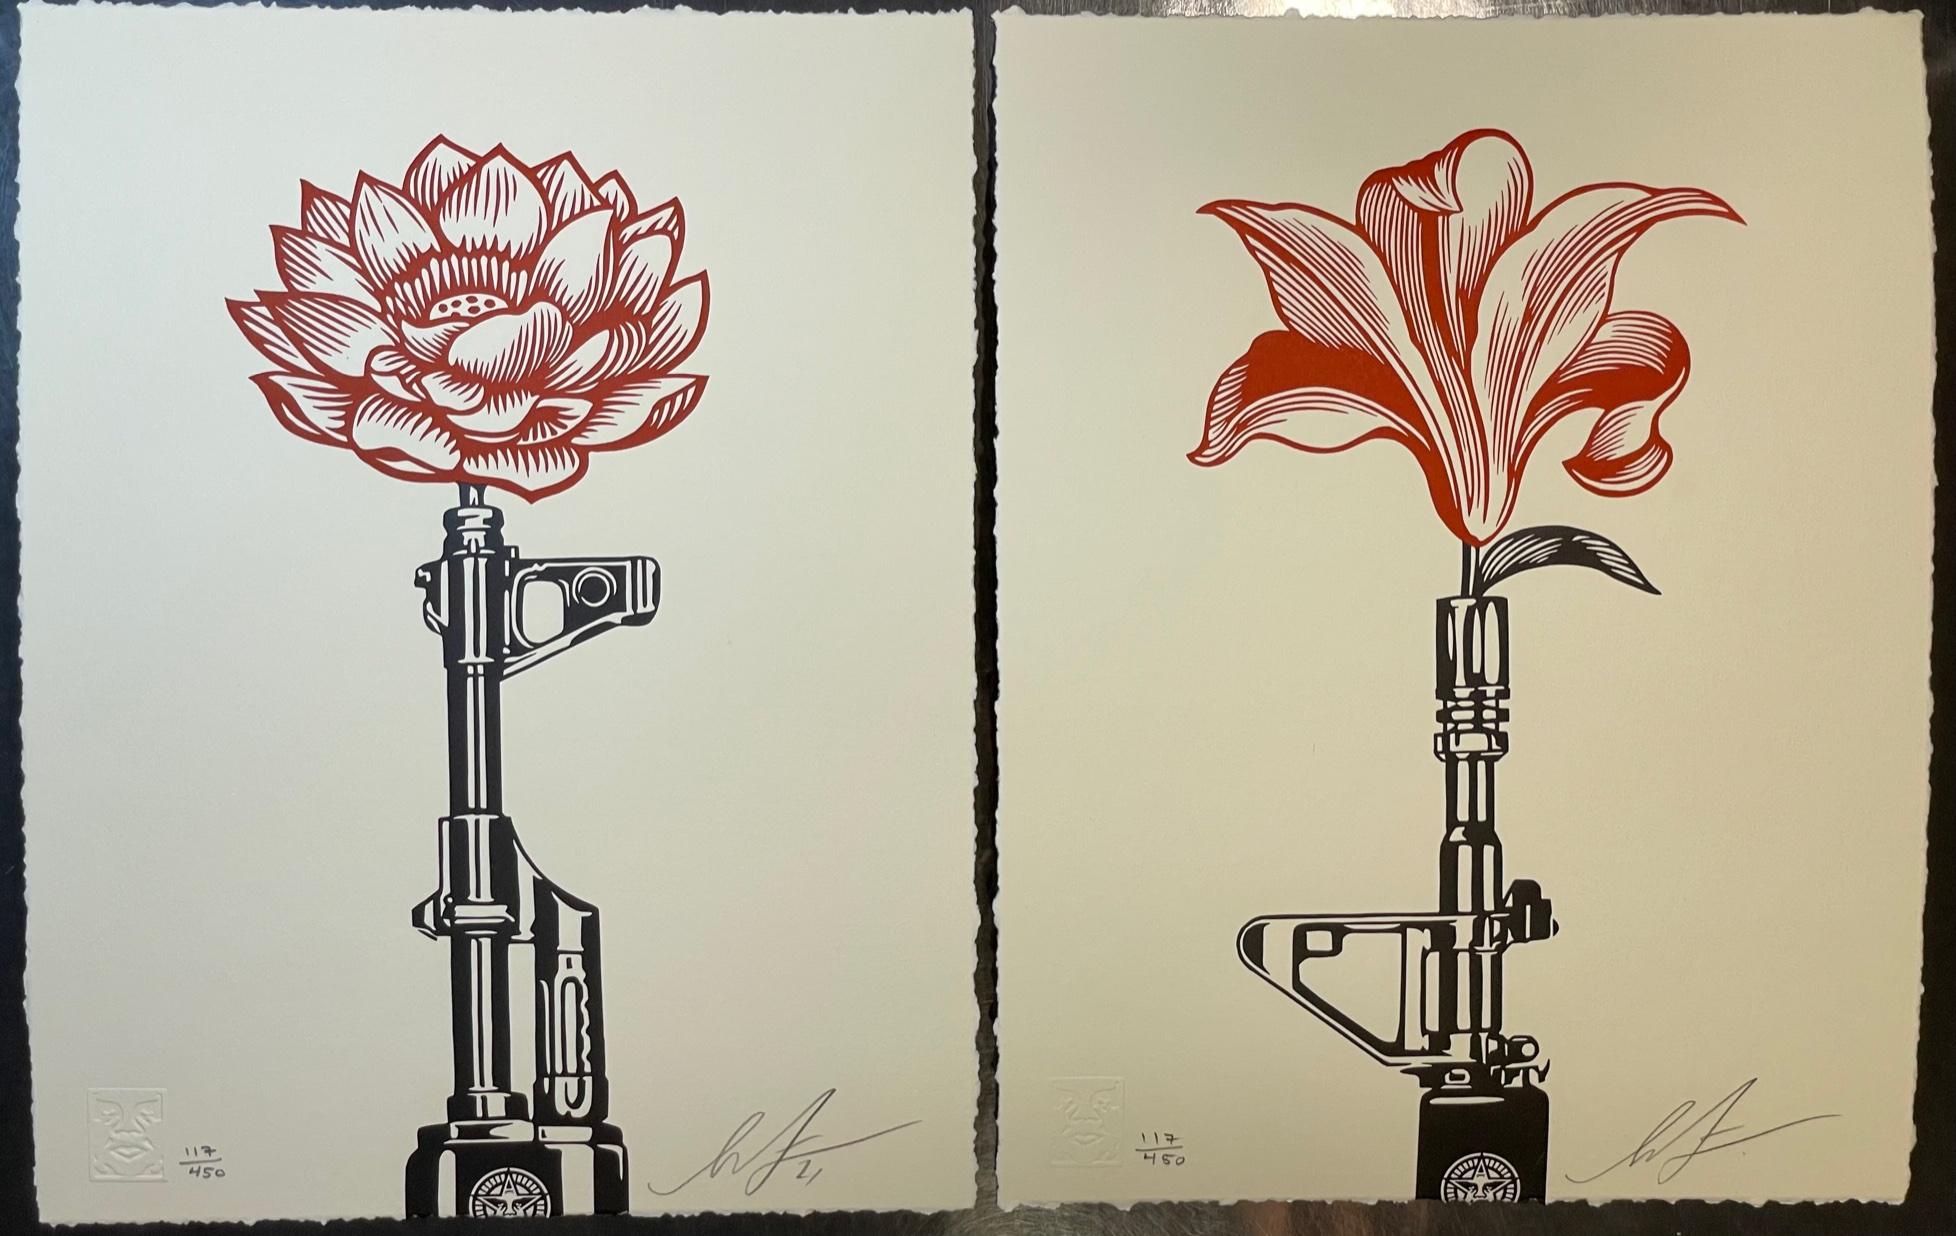 Shepard Fairey OBEY AK-47 LOTUS & AR-15 LILY Signed & Numbered Vietnam War Print 2